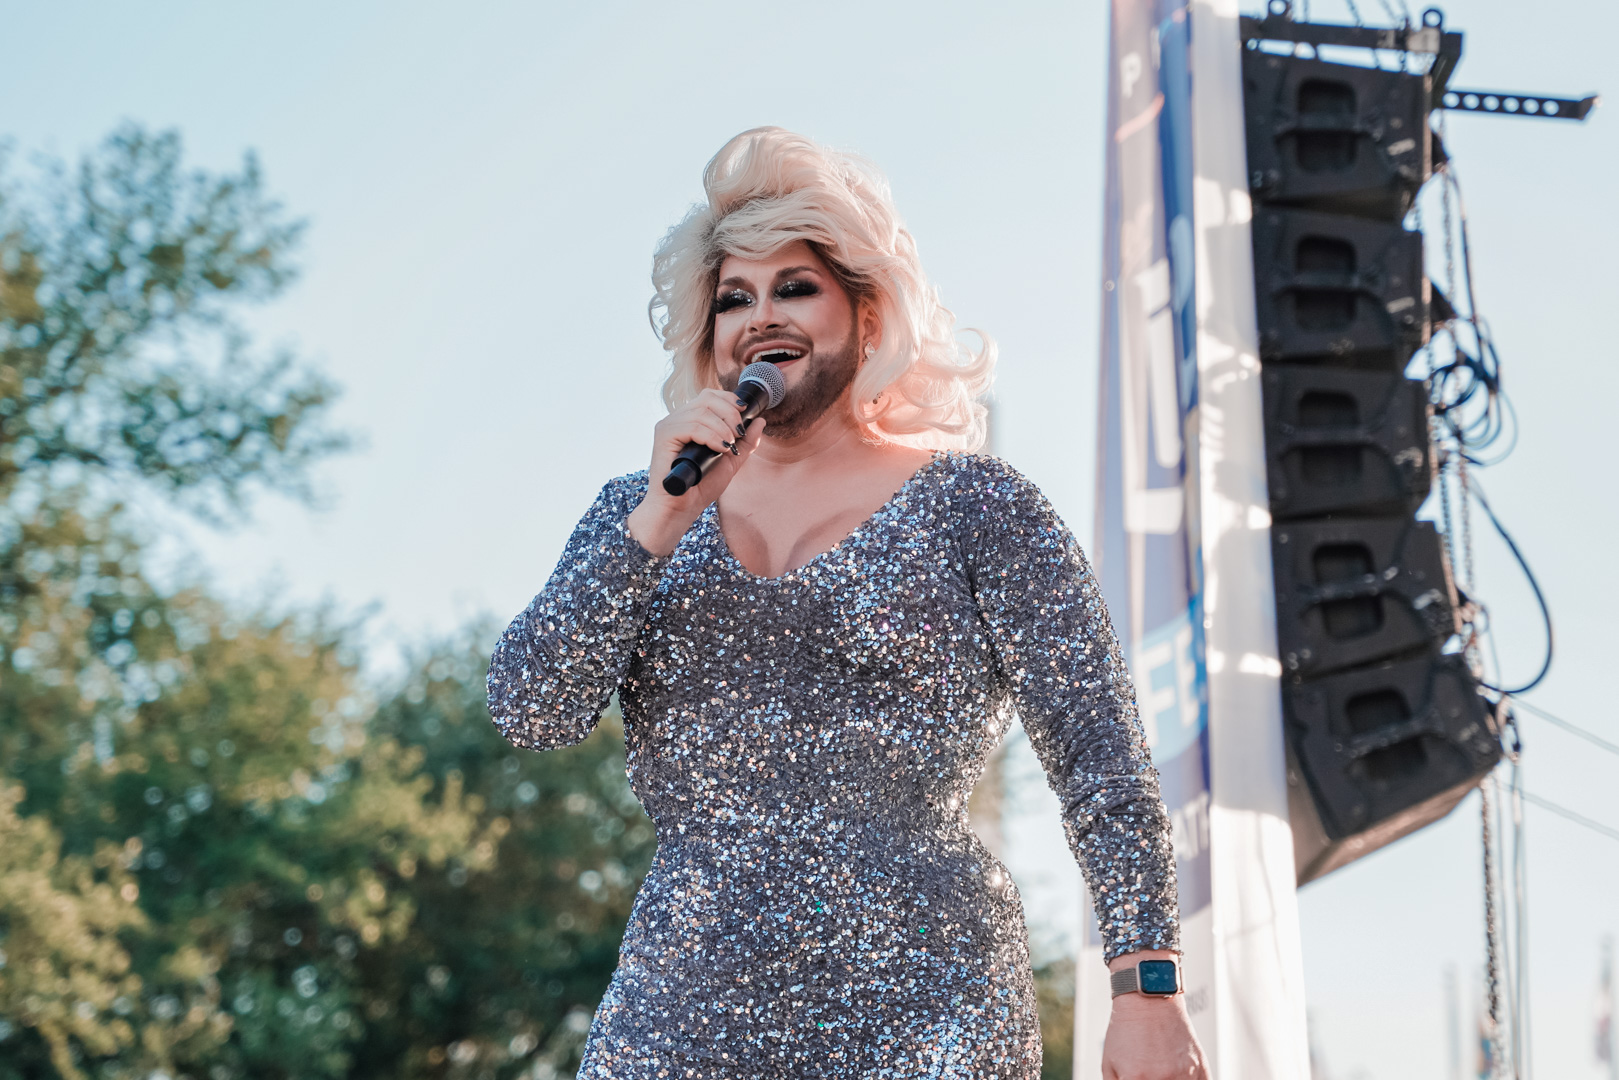 A performer on stage in a very sparkly dress